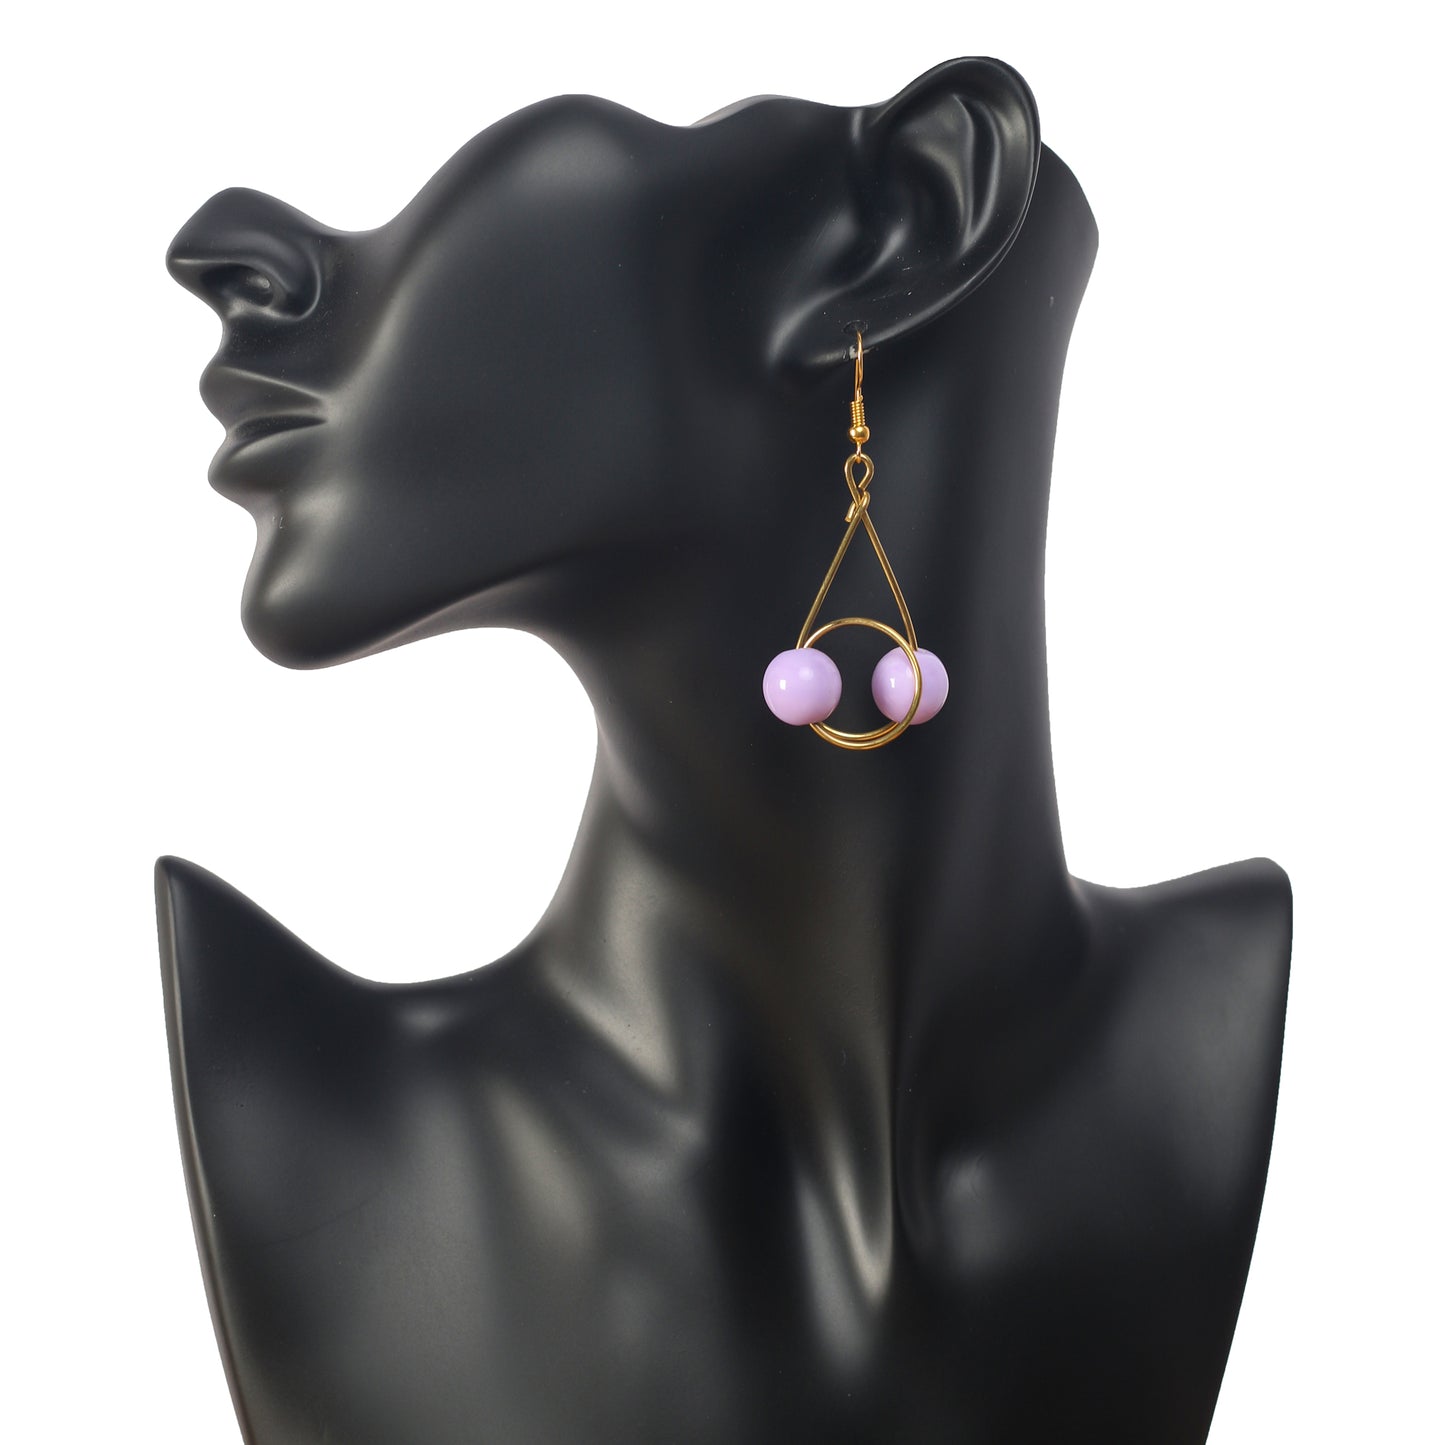 Gold plated earrings with 2 purple beads 